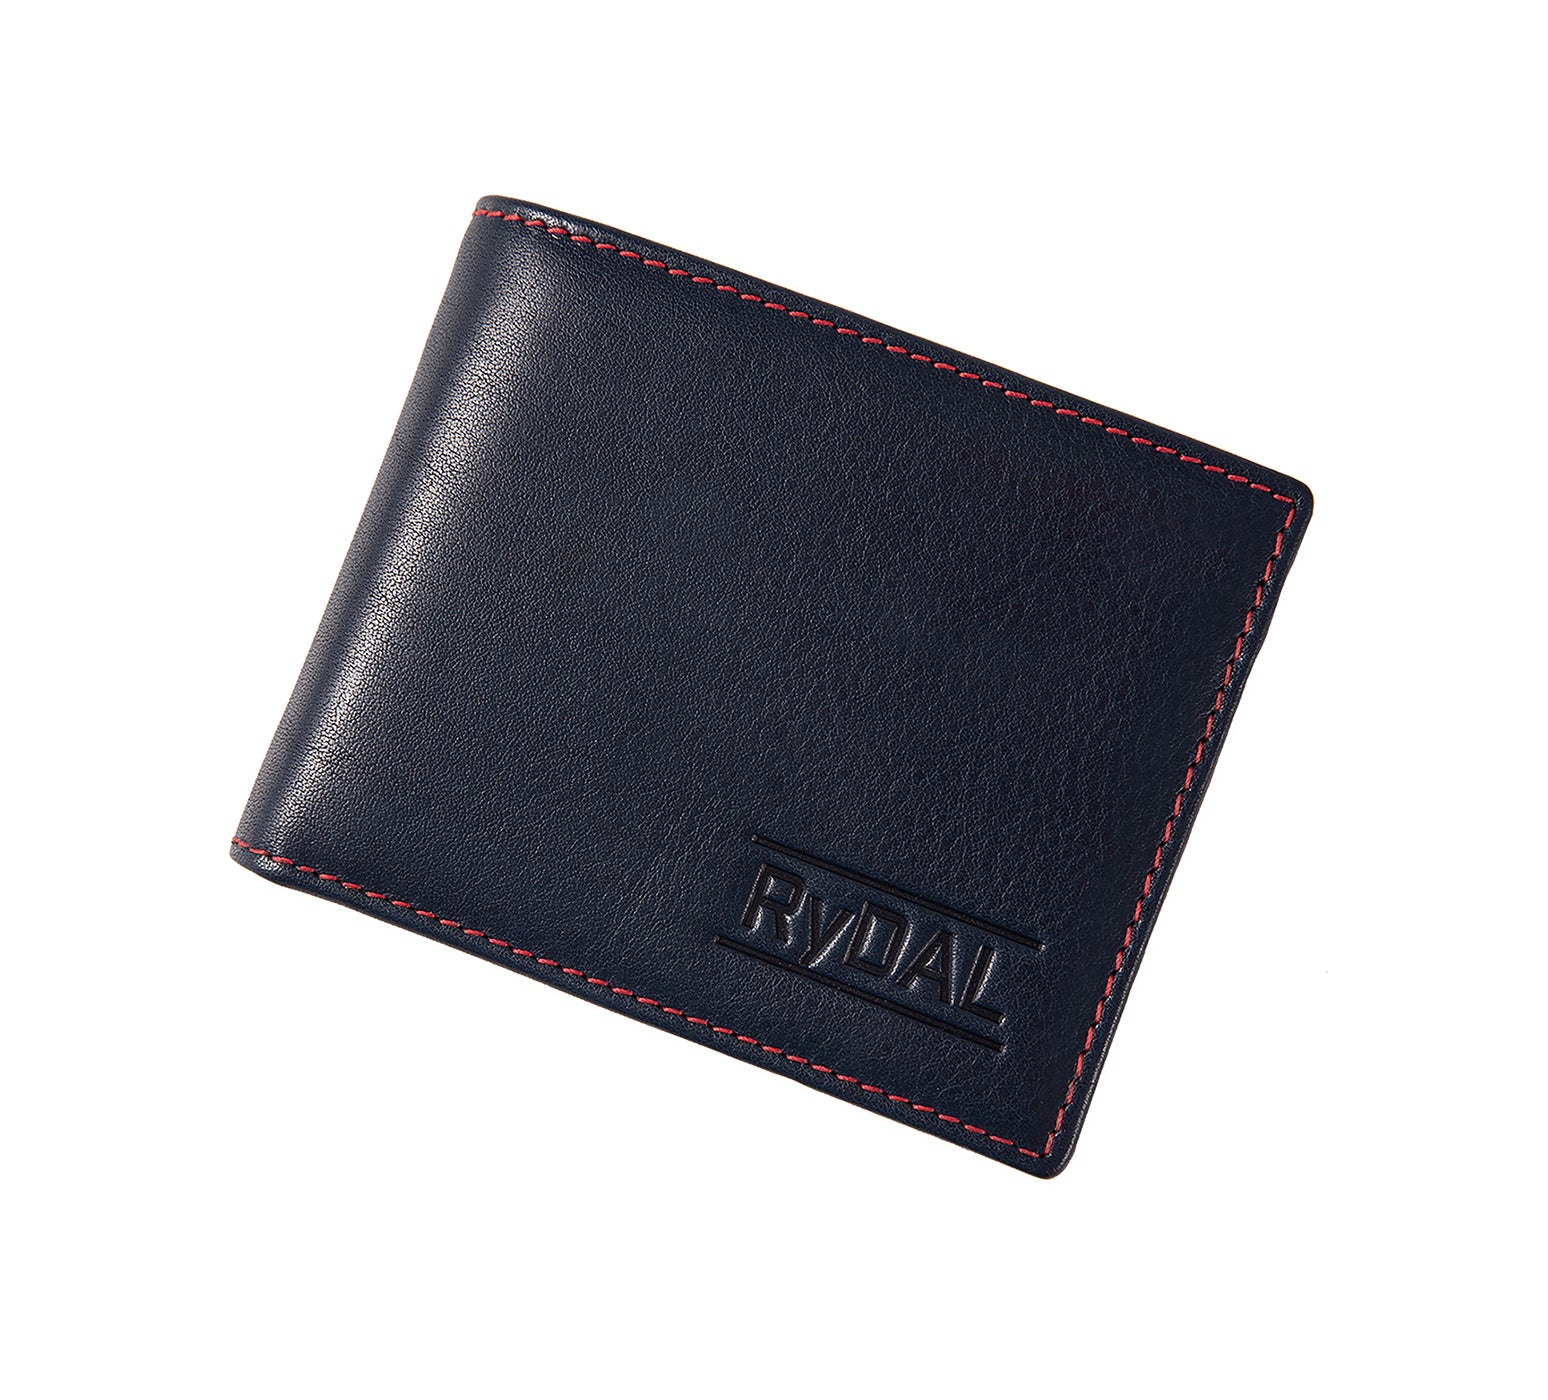 Mens Leather Wallet with Coin Pocket from Rydal in 'Royal Blue/Red' showing wallet closed.